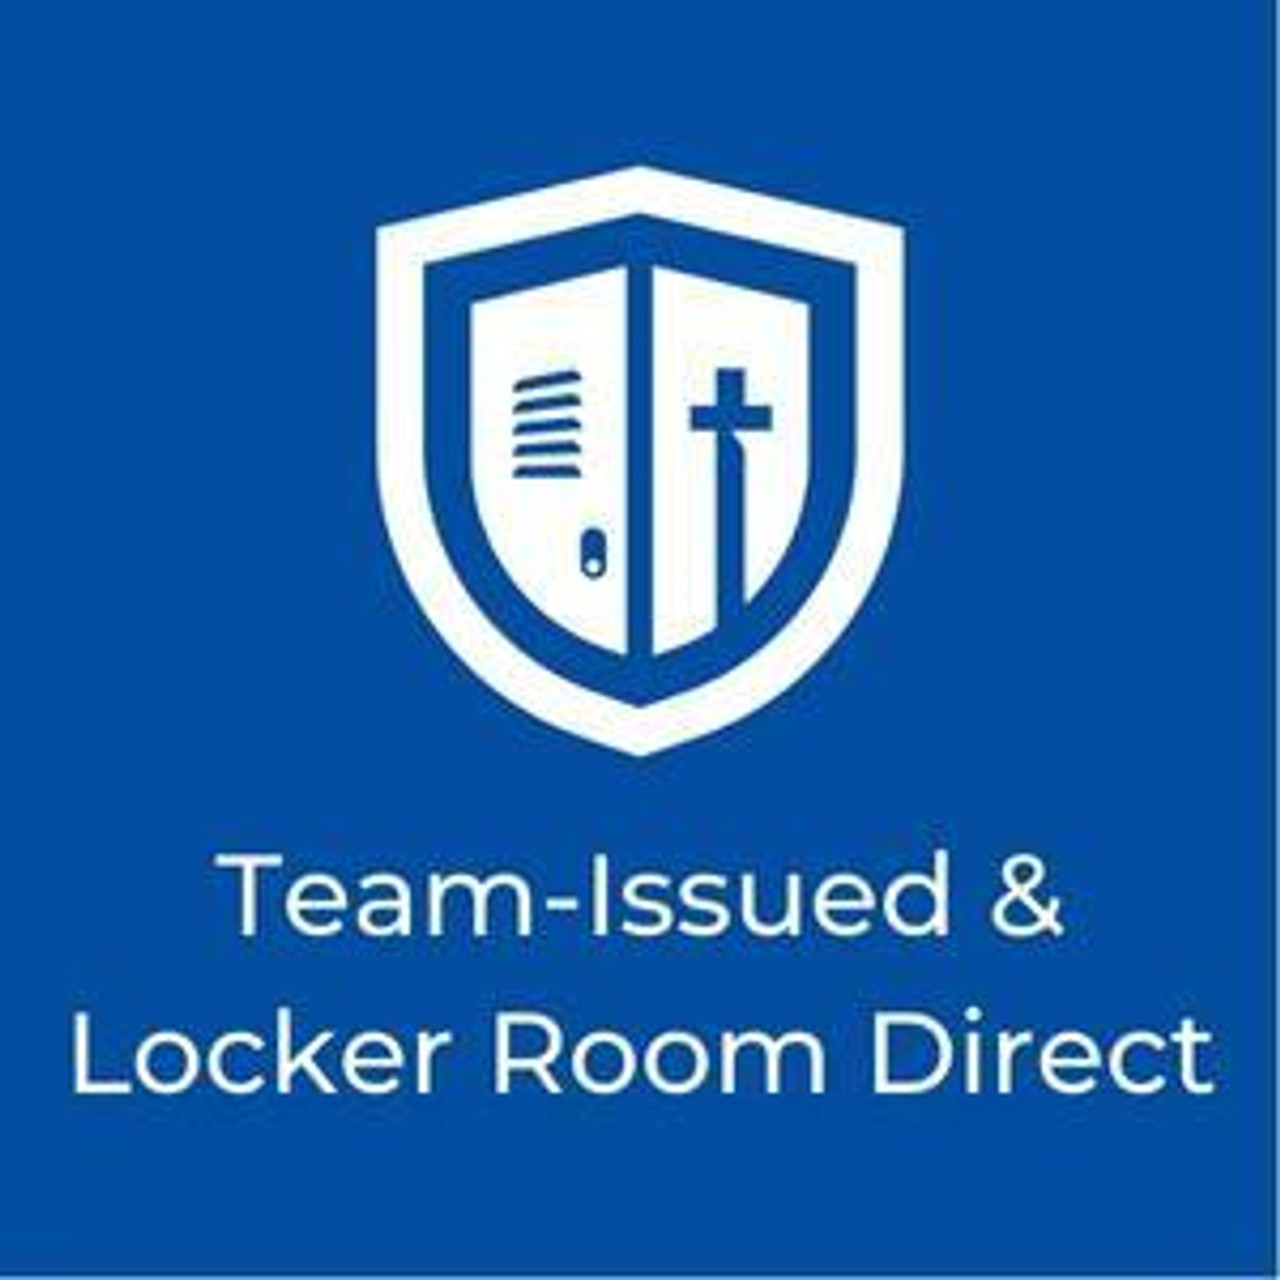 Shop Authentic Team-Issued BCG Sports Apparel from Locker Room Direct